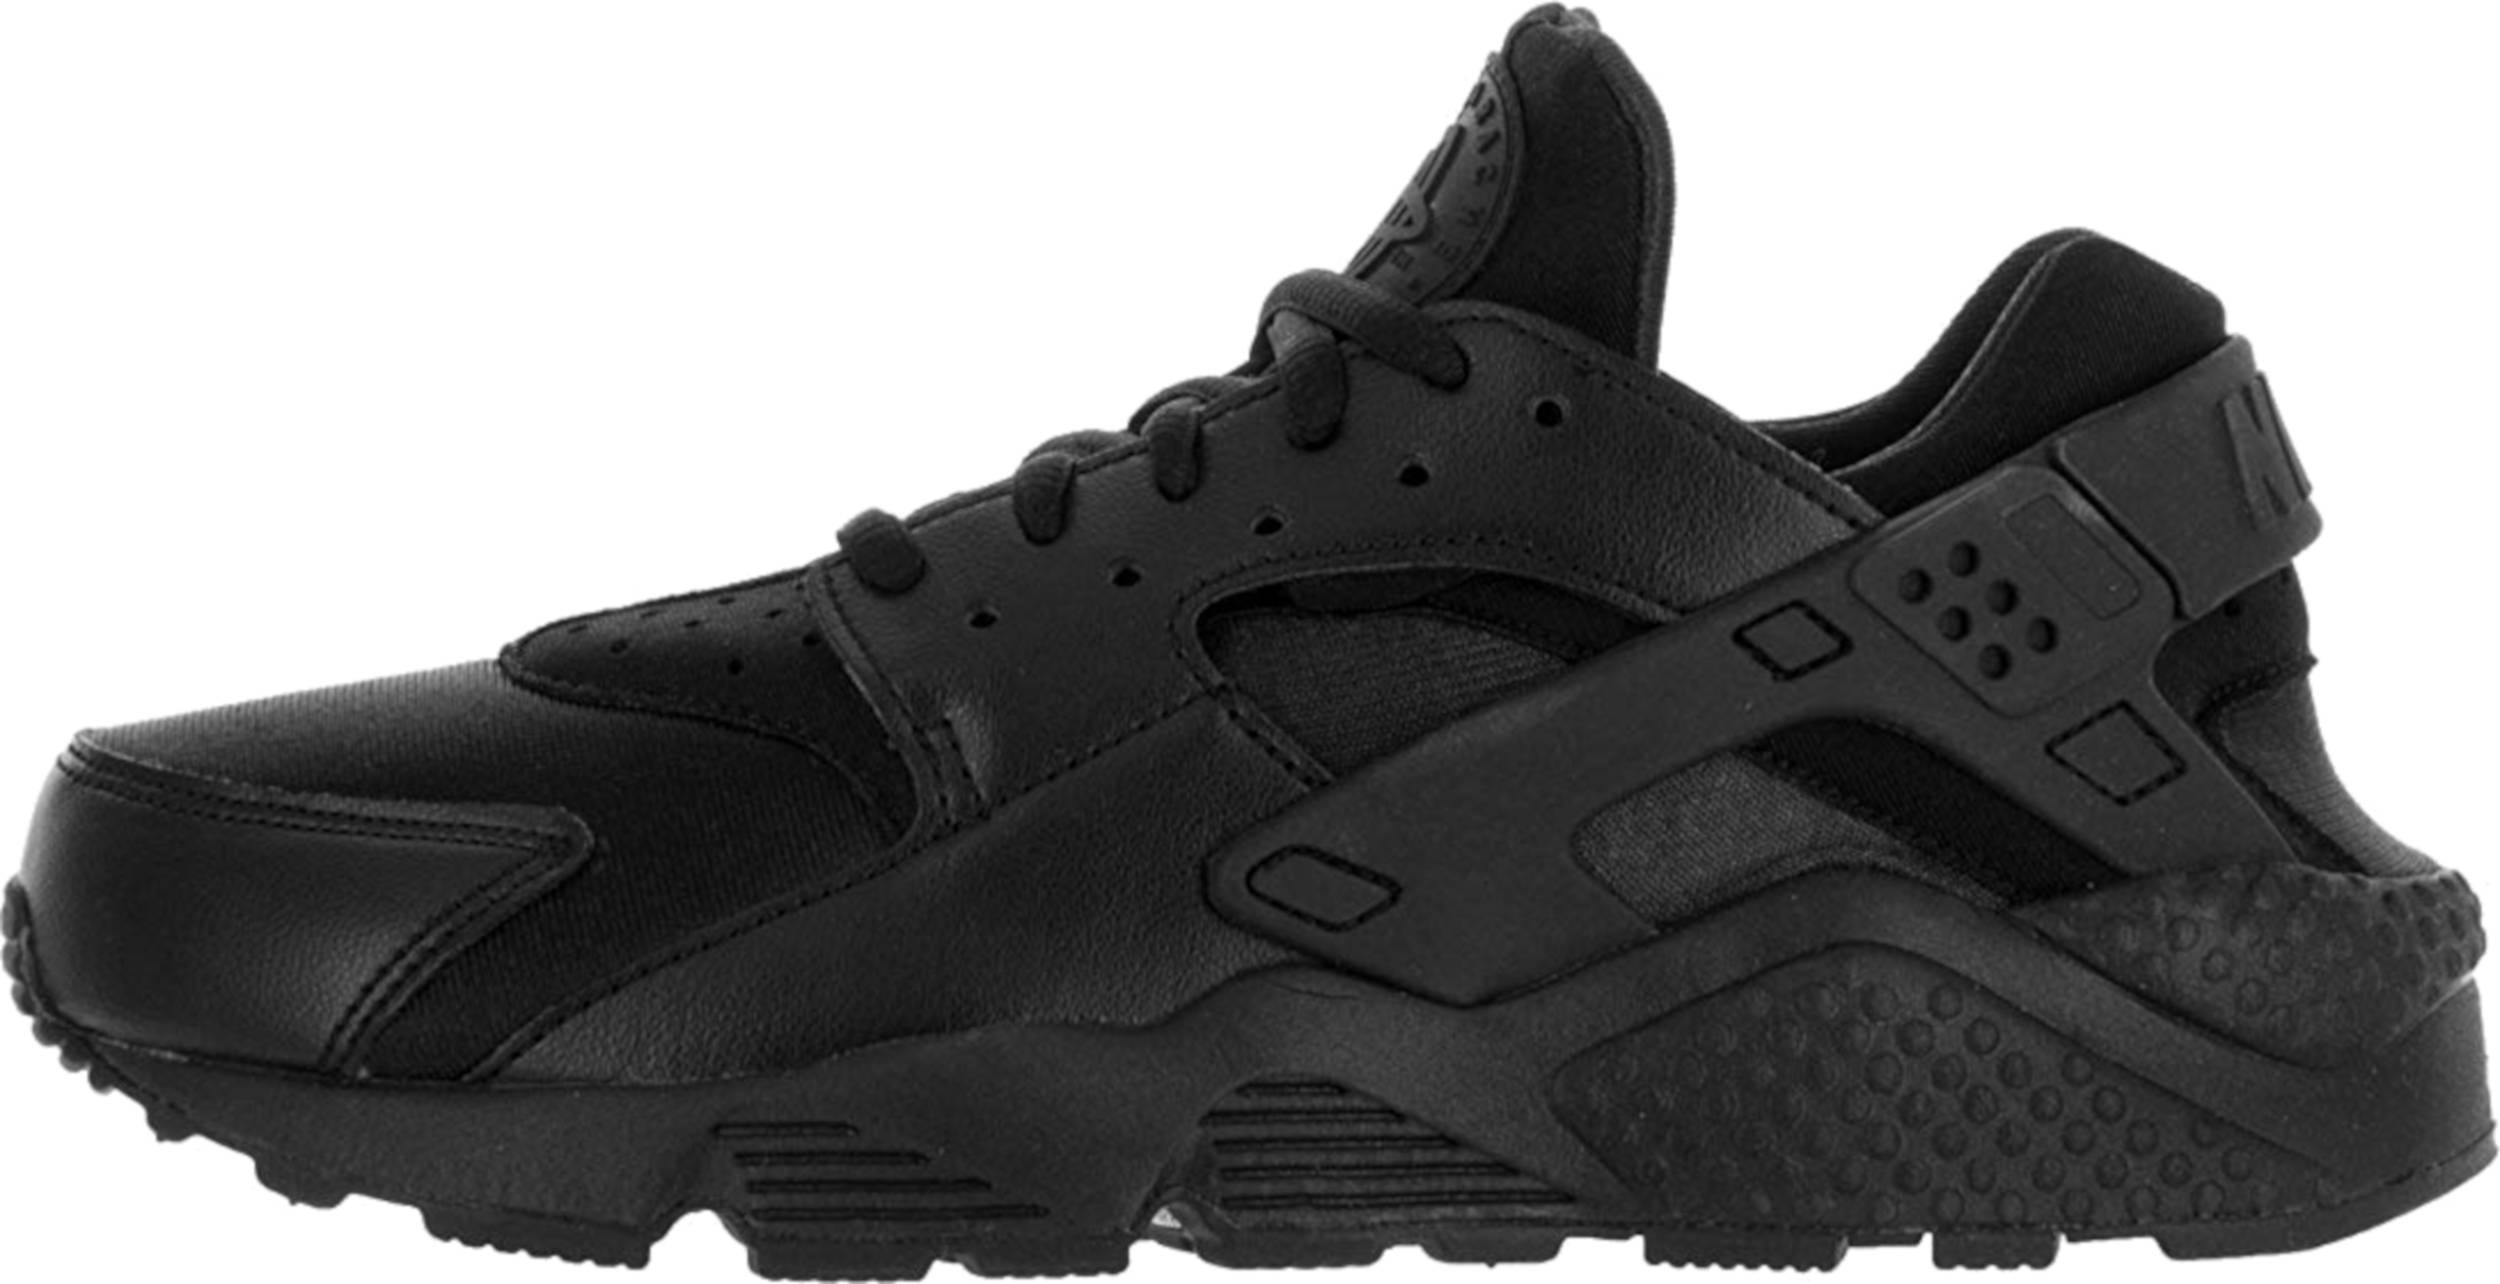 Only £80 + Review of Nike Air Huarache 